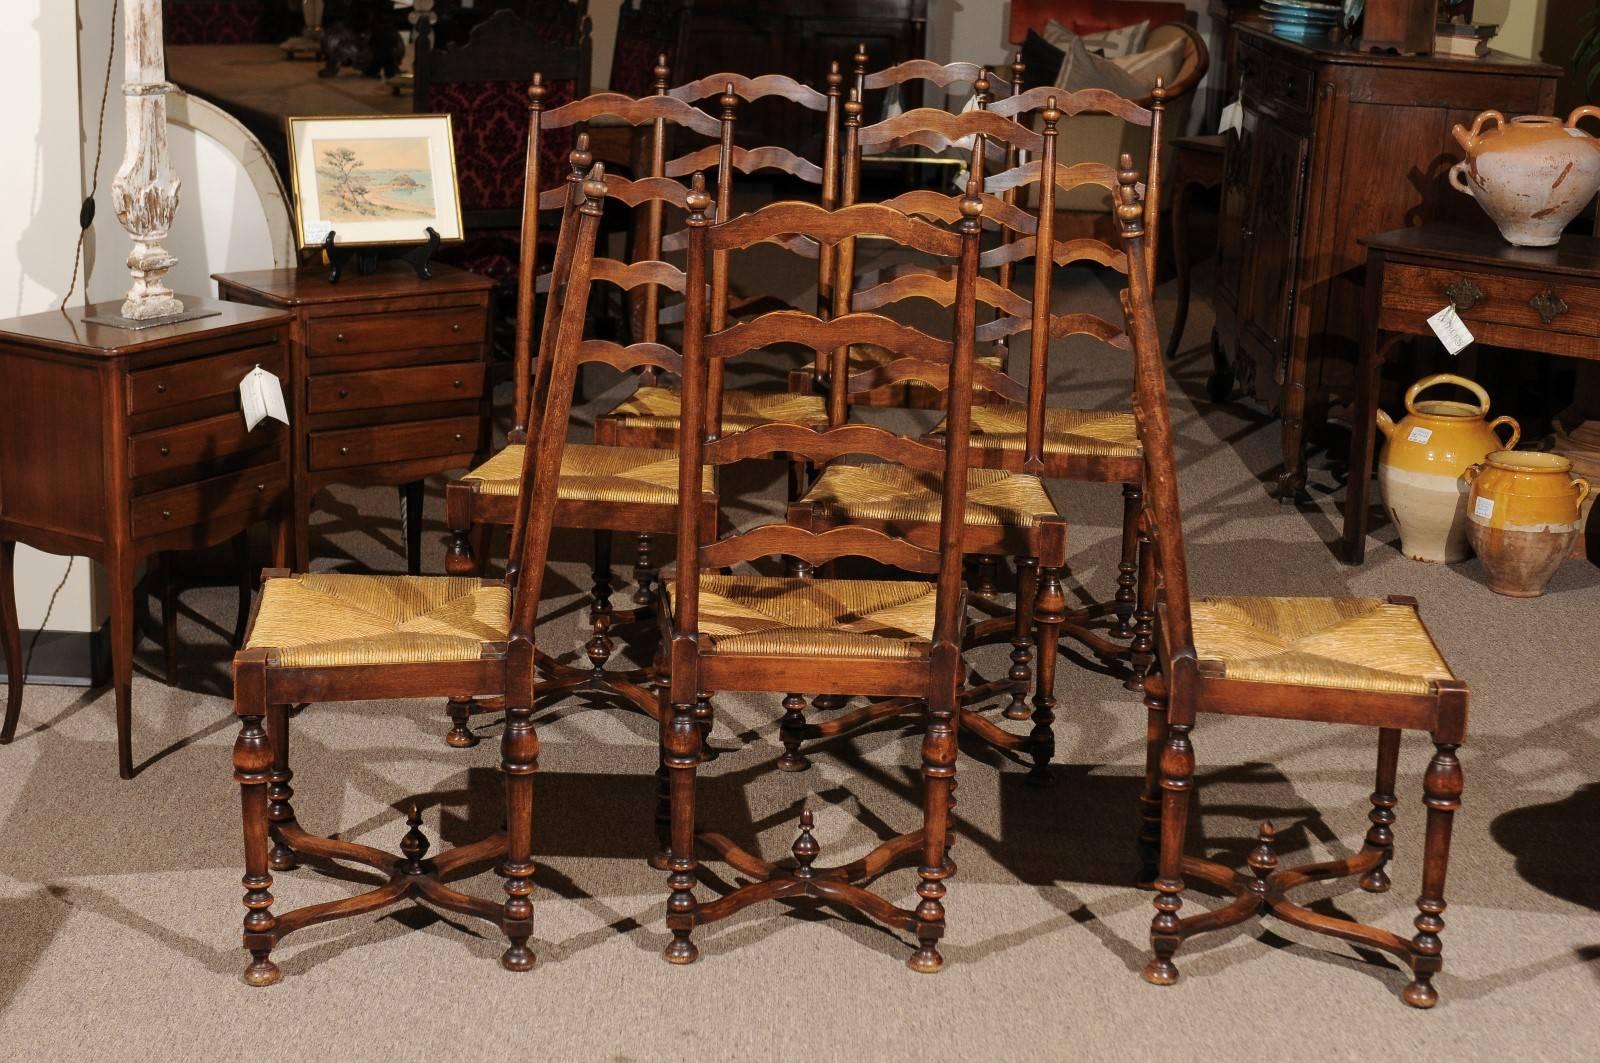 Set of Eight Midcentury French Walnut Ladderback Chairs, circa 1950 For Sale 2